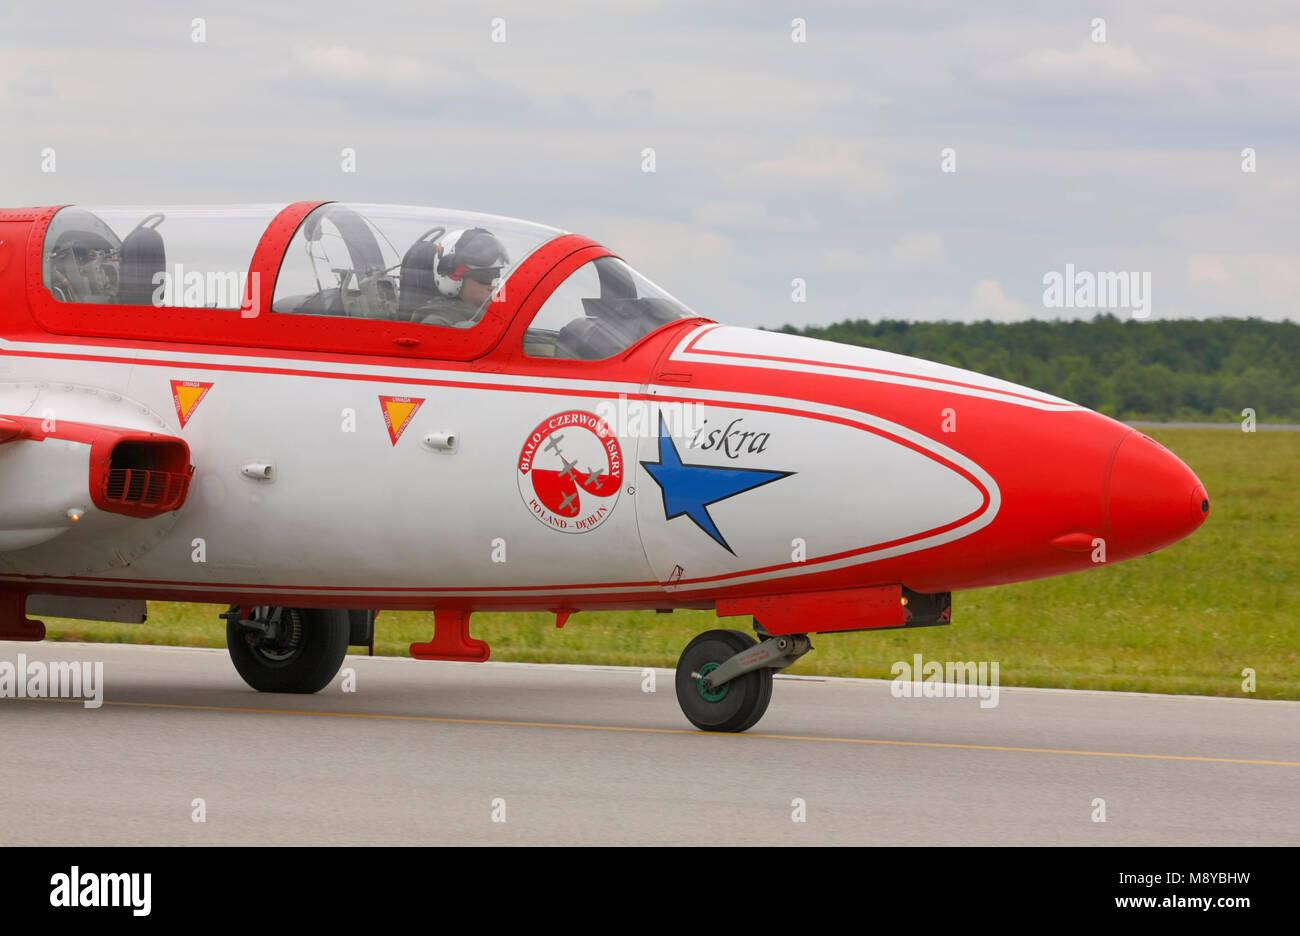 The Polish Air Force TS-11 Iskra MR of White-Red Sparks (Bialo-Czerwone Iskry) aerobatics team on runway during International Air Show. Stock Photo